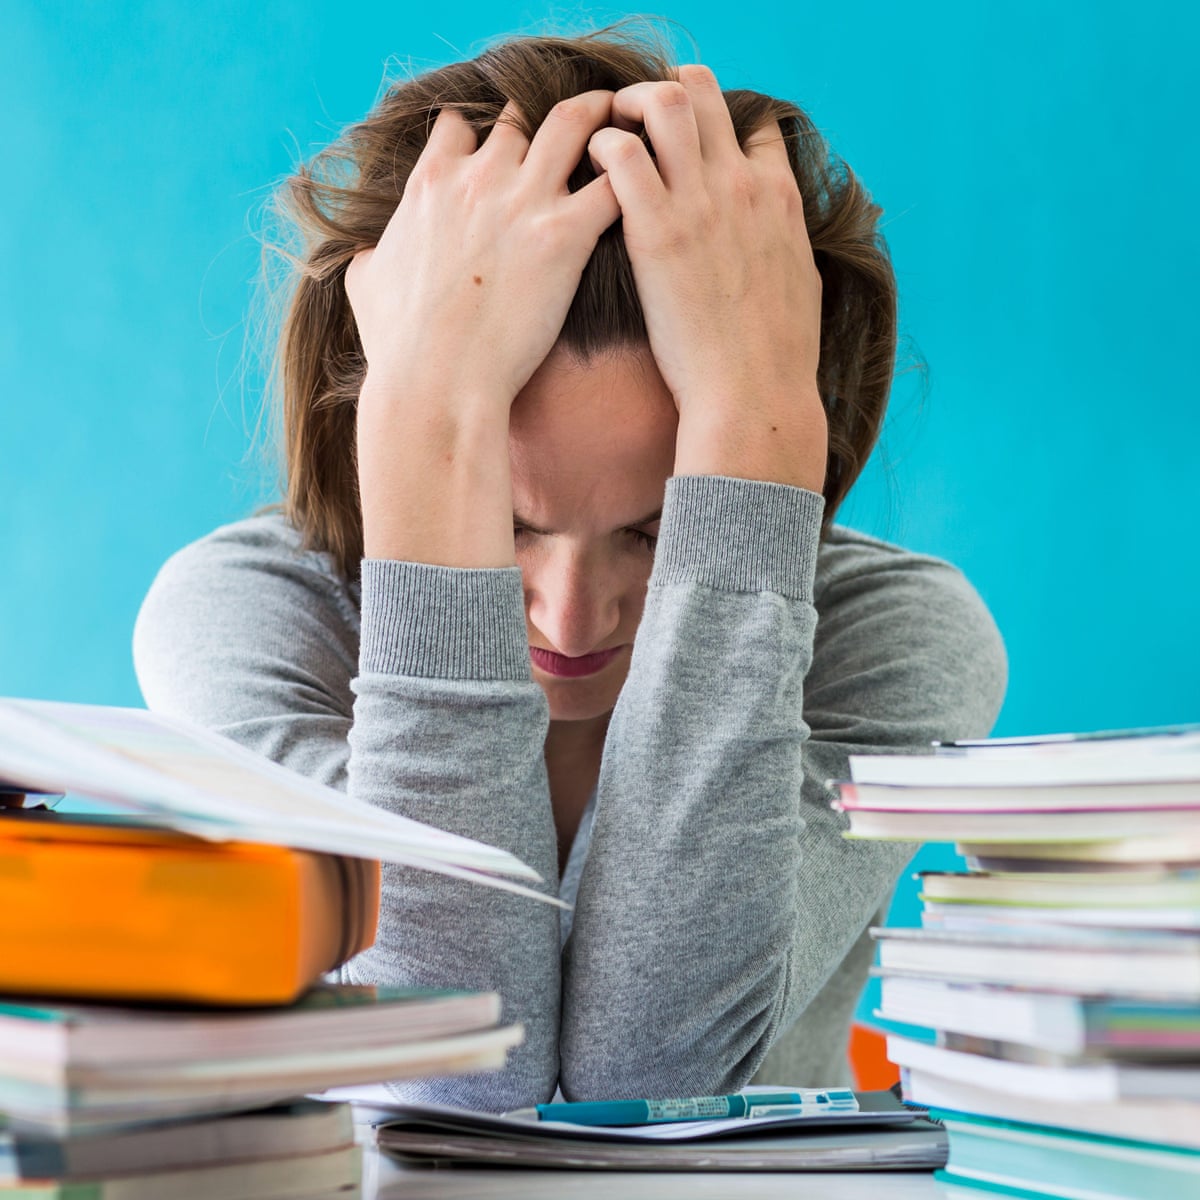 Burned out: why are so many teachers quitting or off sick with stress? |  Teaching | The Guardian